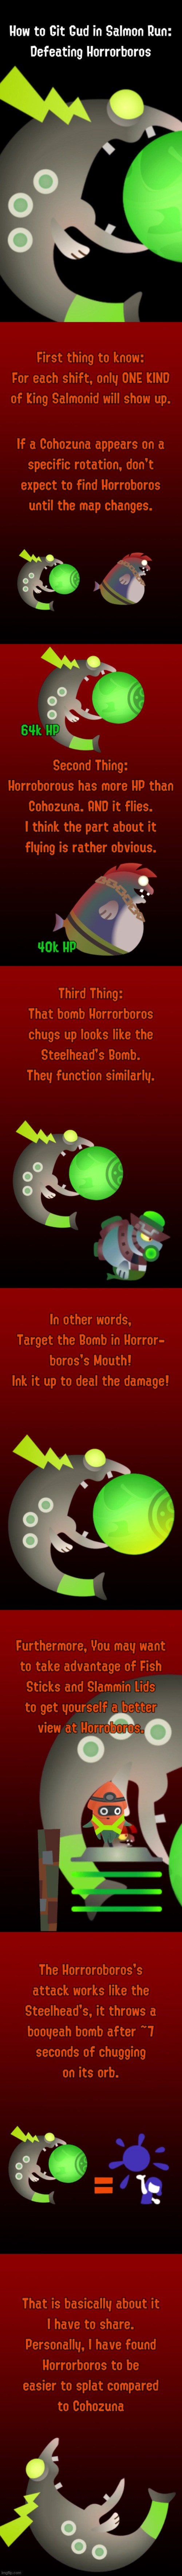 A happy little workers guide to salmonids: Horrorboros | image tagged in splatoon,internet guide,tips | made w/ Imgflip meme maker